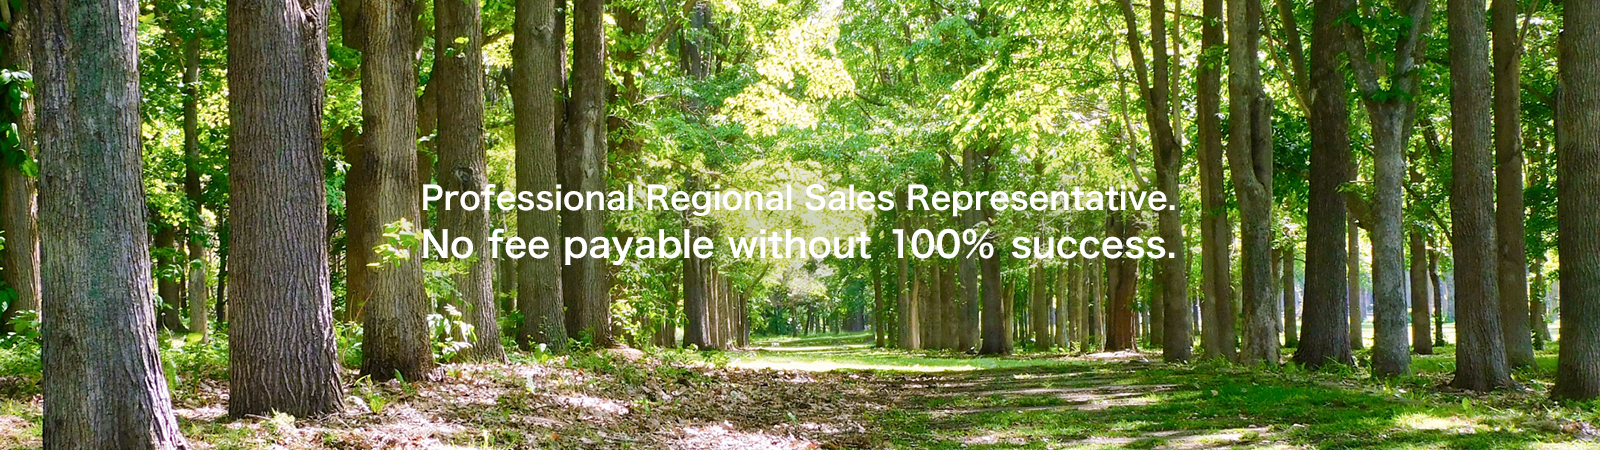 Professional Regional Sales Representative. No fee payable without 100% success.